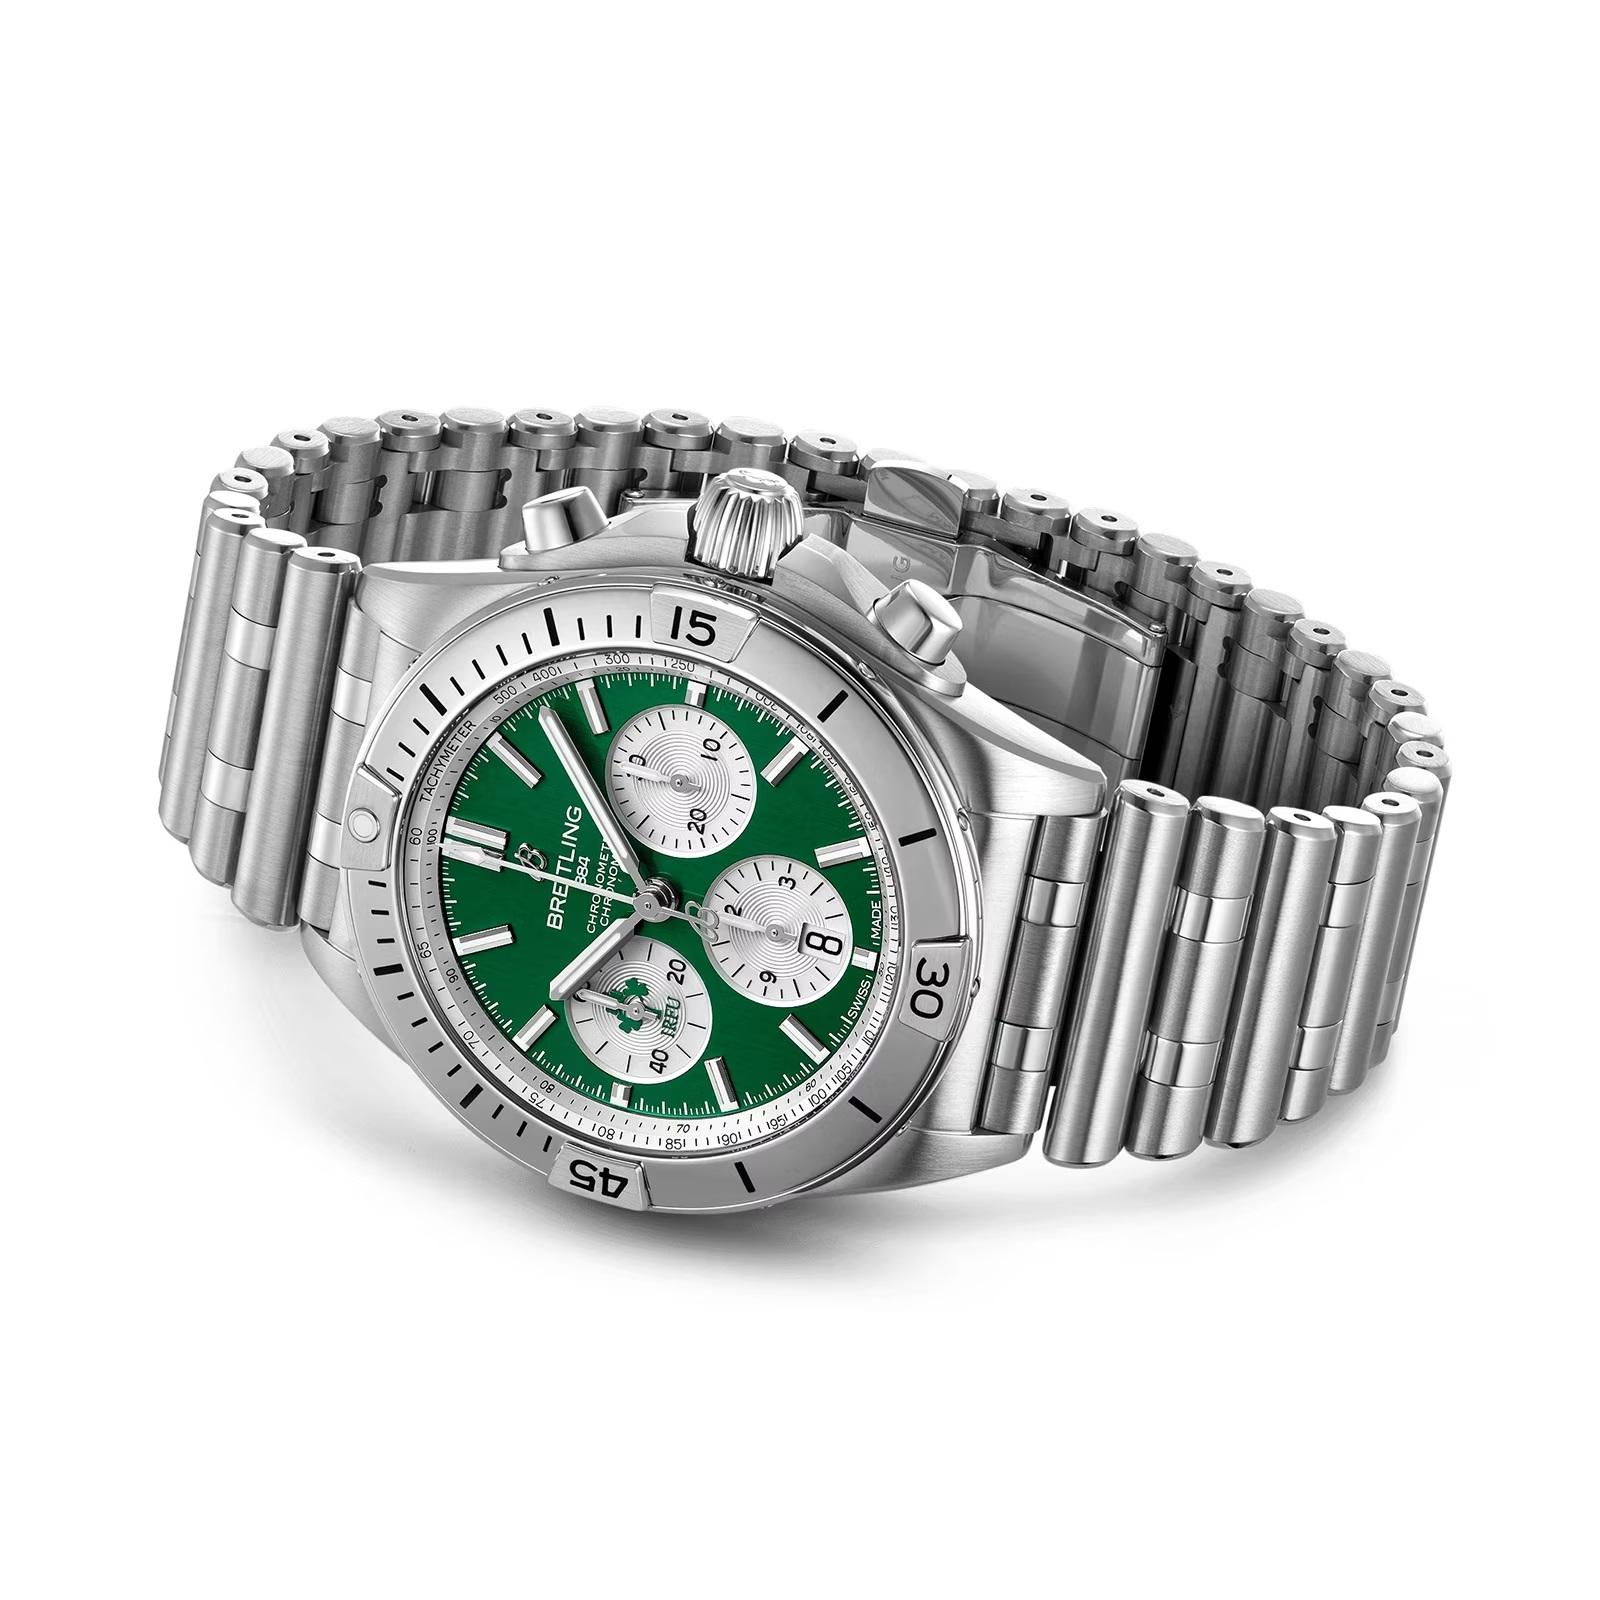  ChRONOMAT B01 NOUVEAU BRAND ÉDITION EARLY EDiTION NEW BREITLING, 42 SIX NATIONS IRELAND WATCH Unisexe 